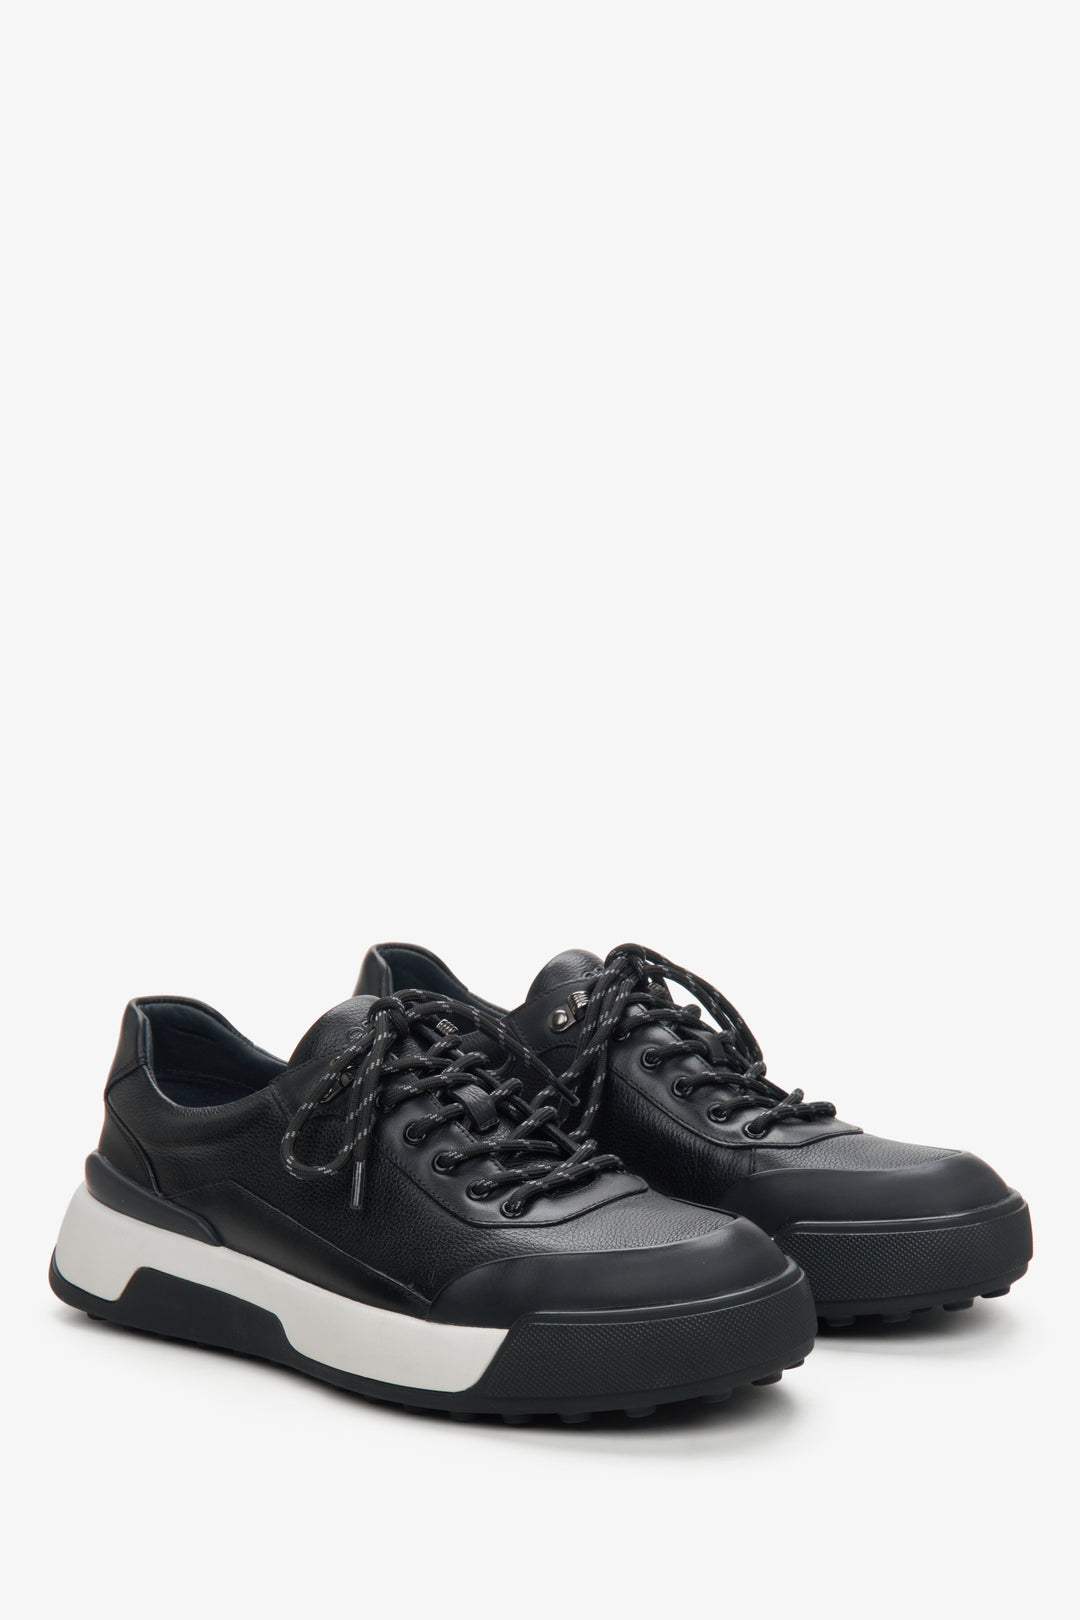 Men's black leather sneakers with a white stripe by Estro.